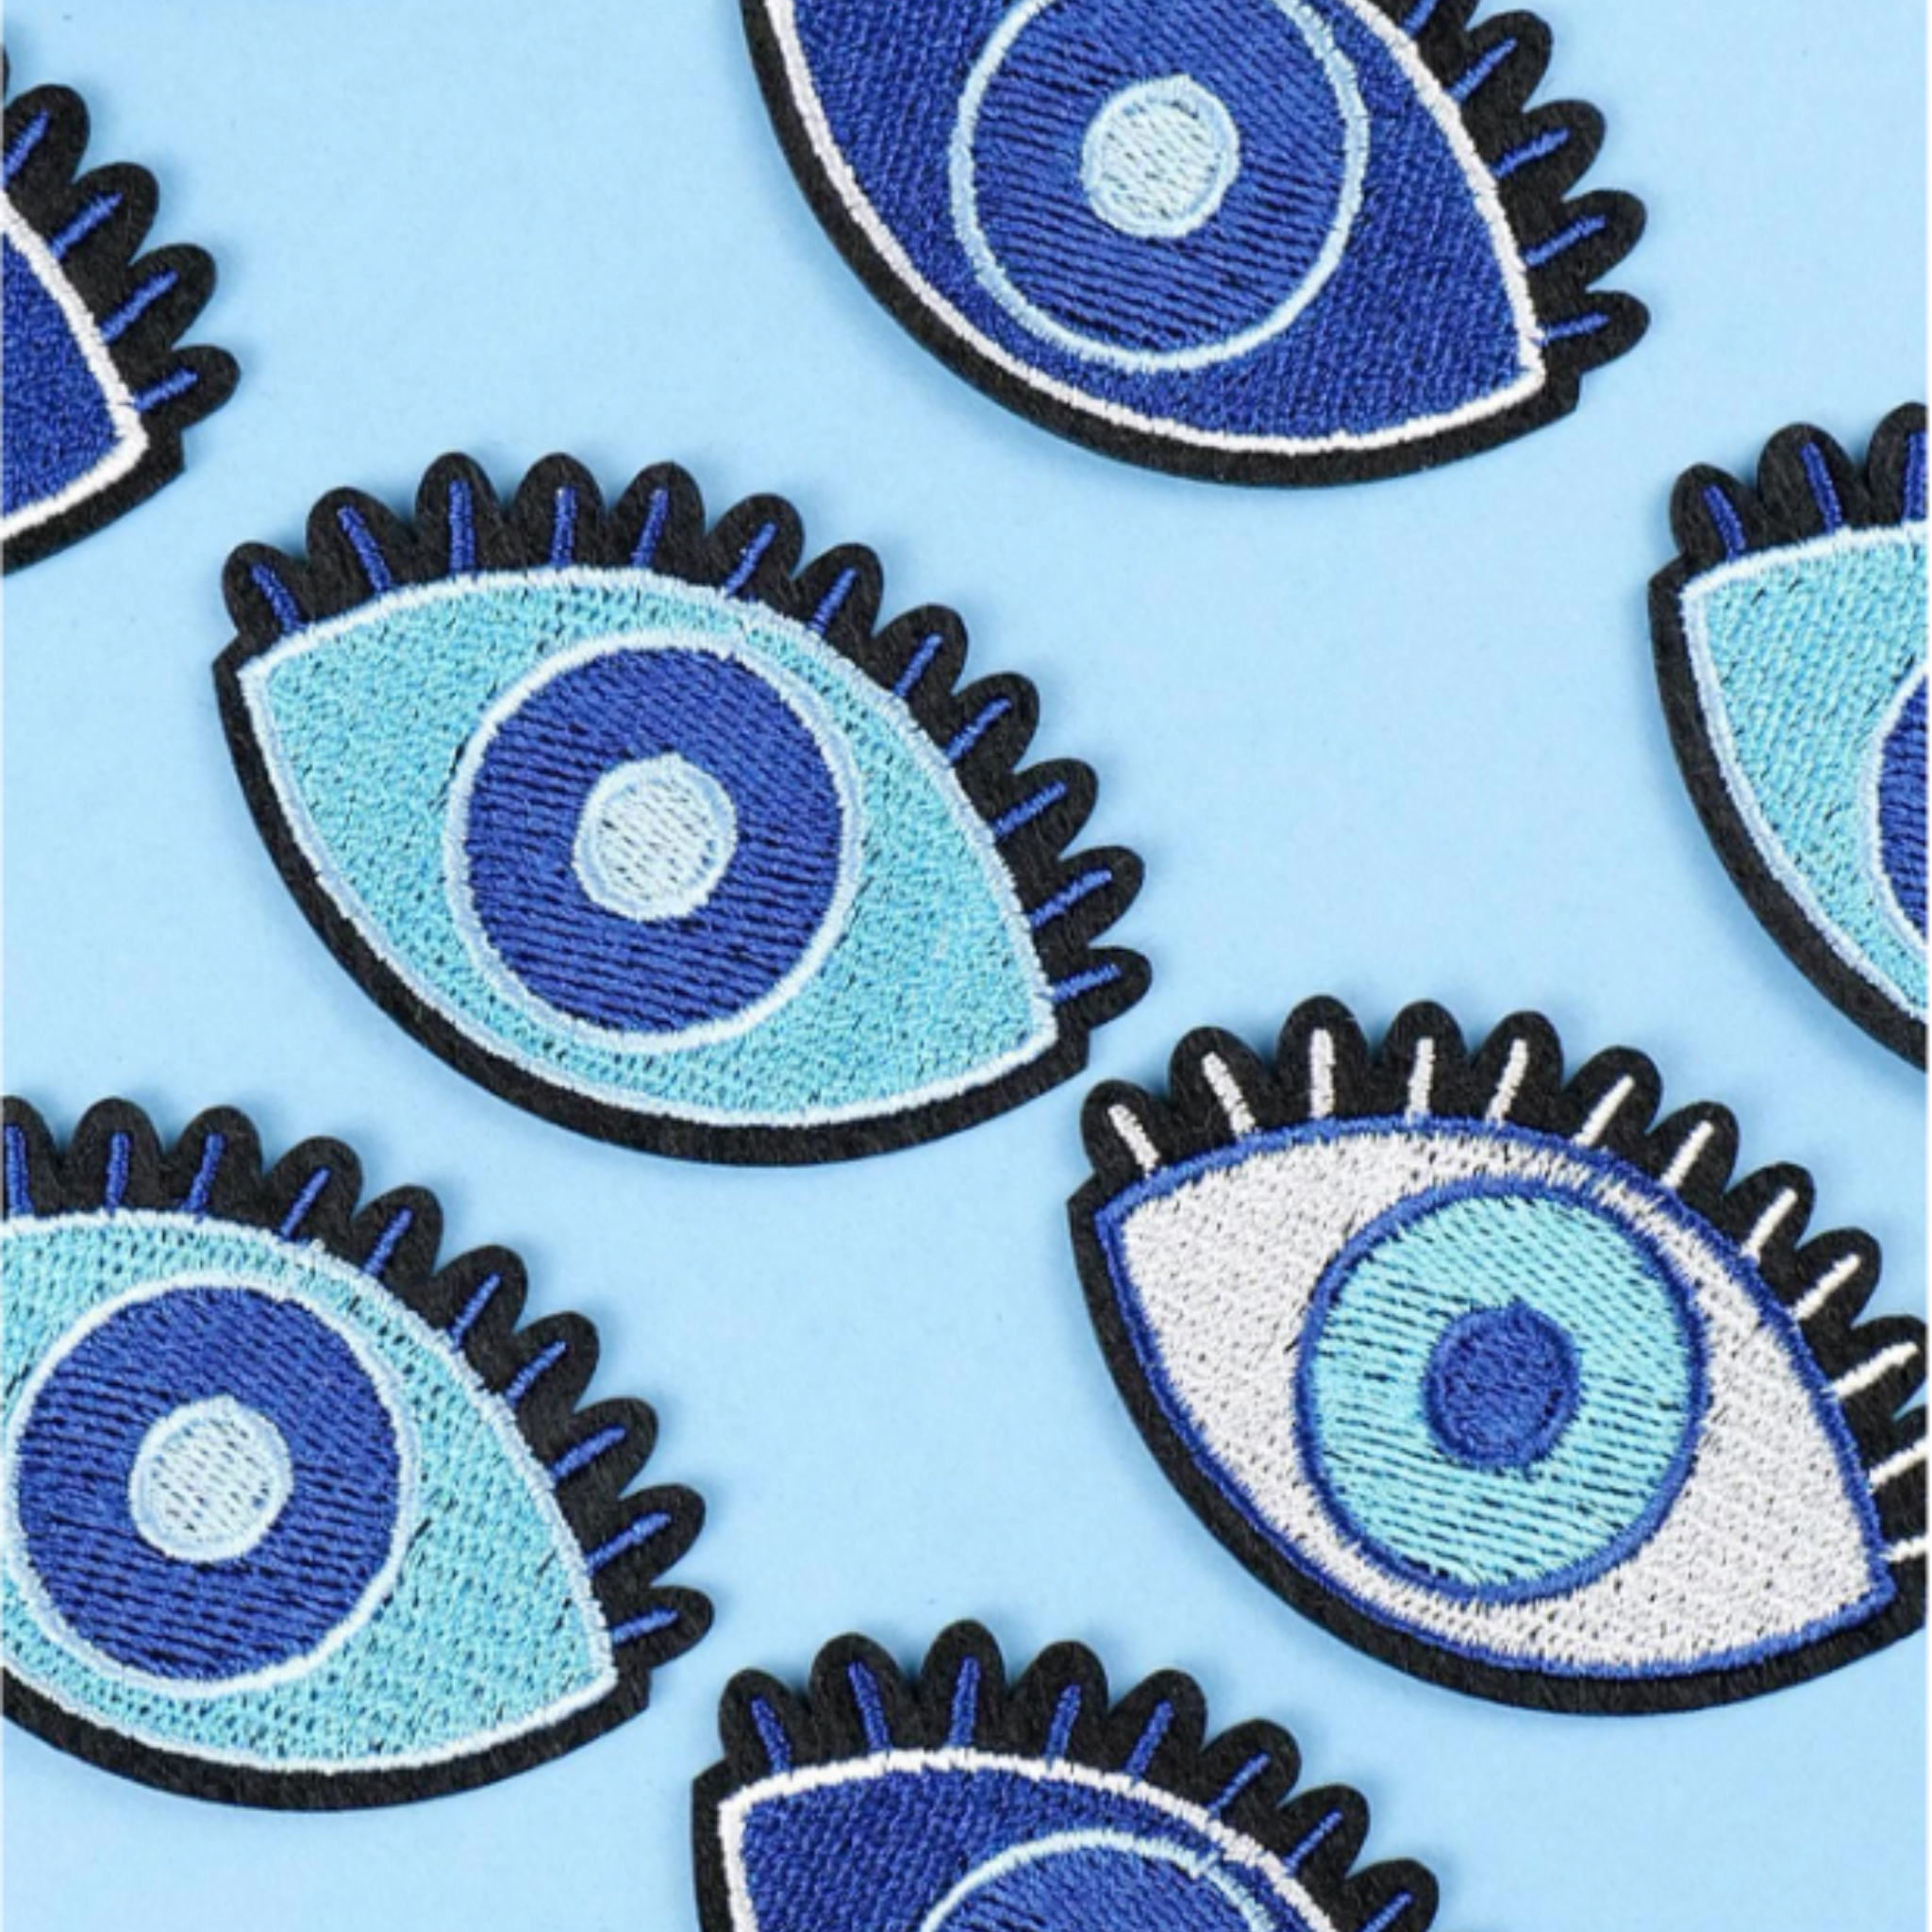 Navy Blue Evil Eye Patches - 2/pk – Ah! The Element of Surprise